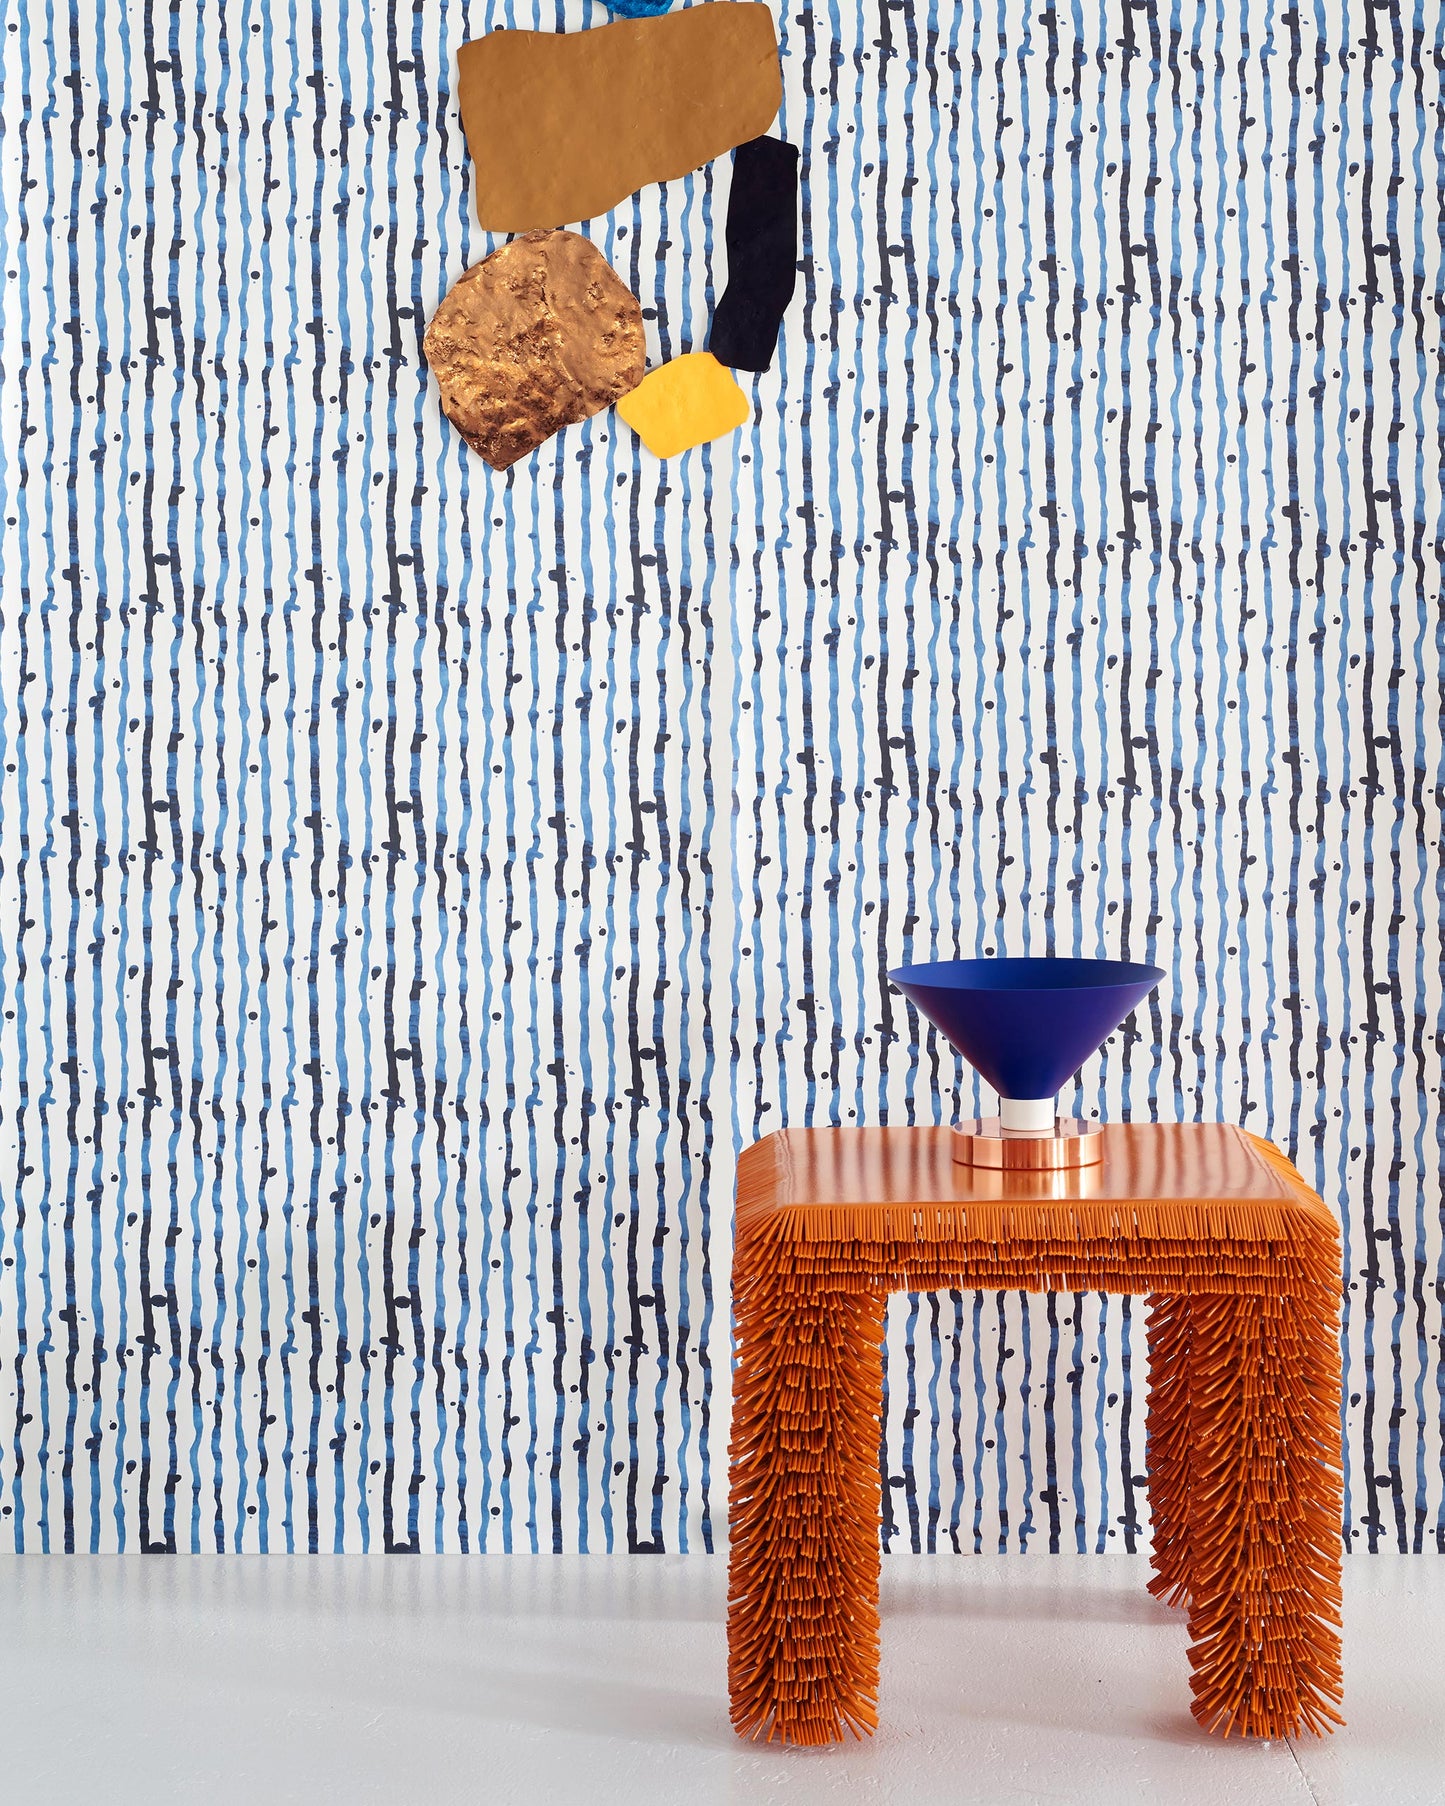 A table with an orange stool in front of a blue Drippy Stripe Wallpaper||Azure fabric.